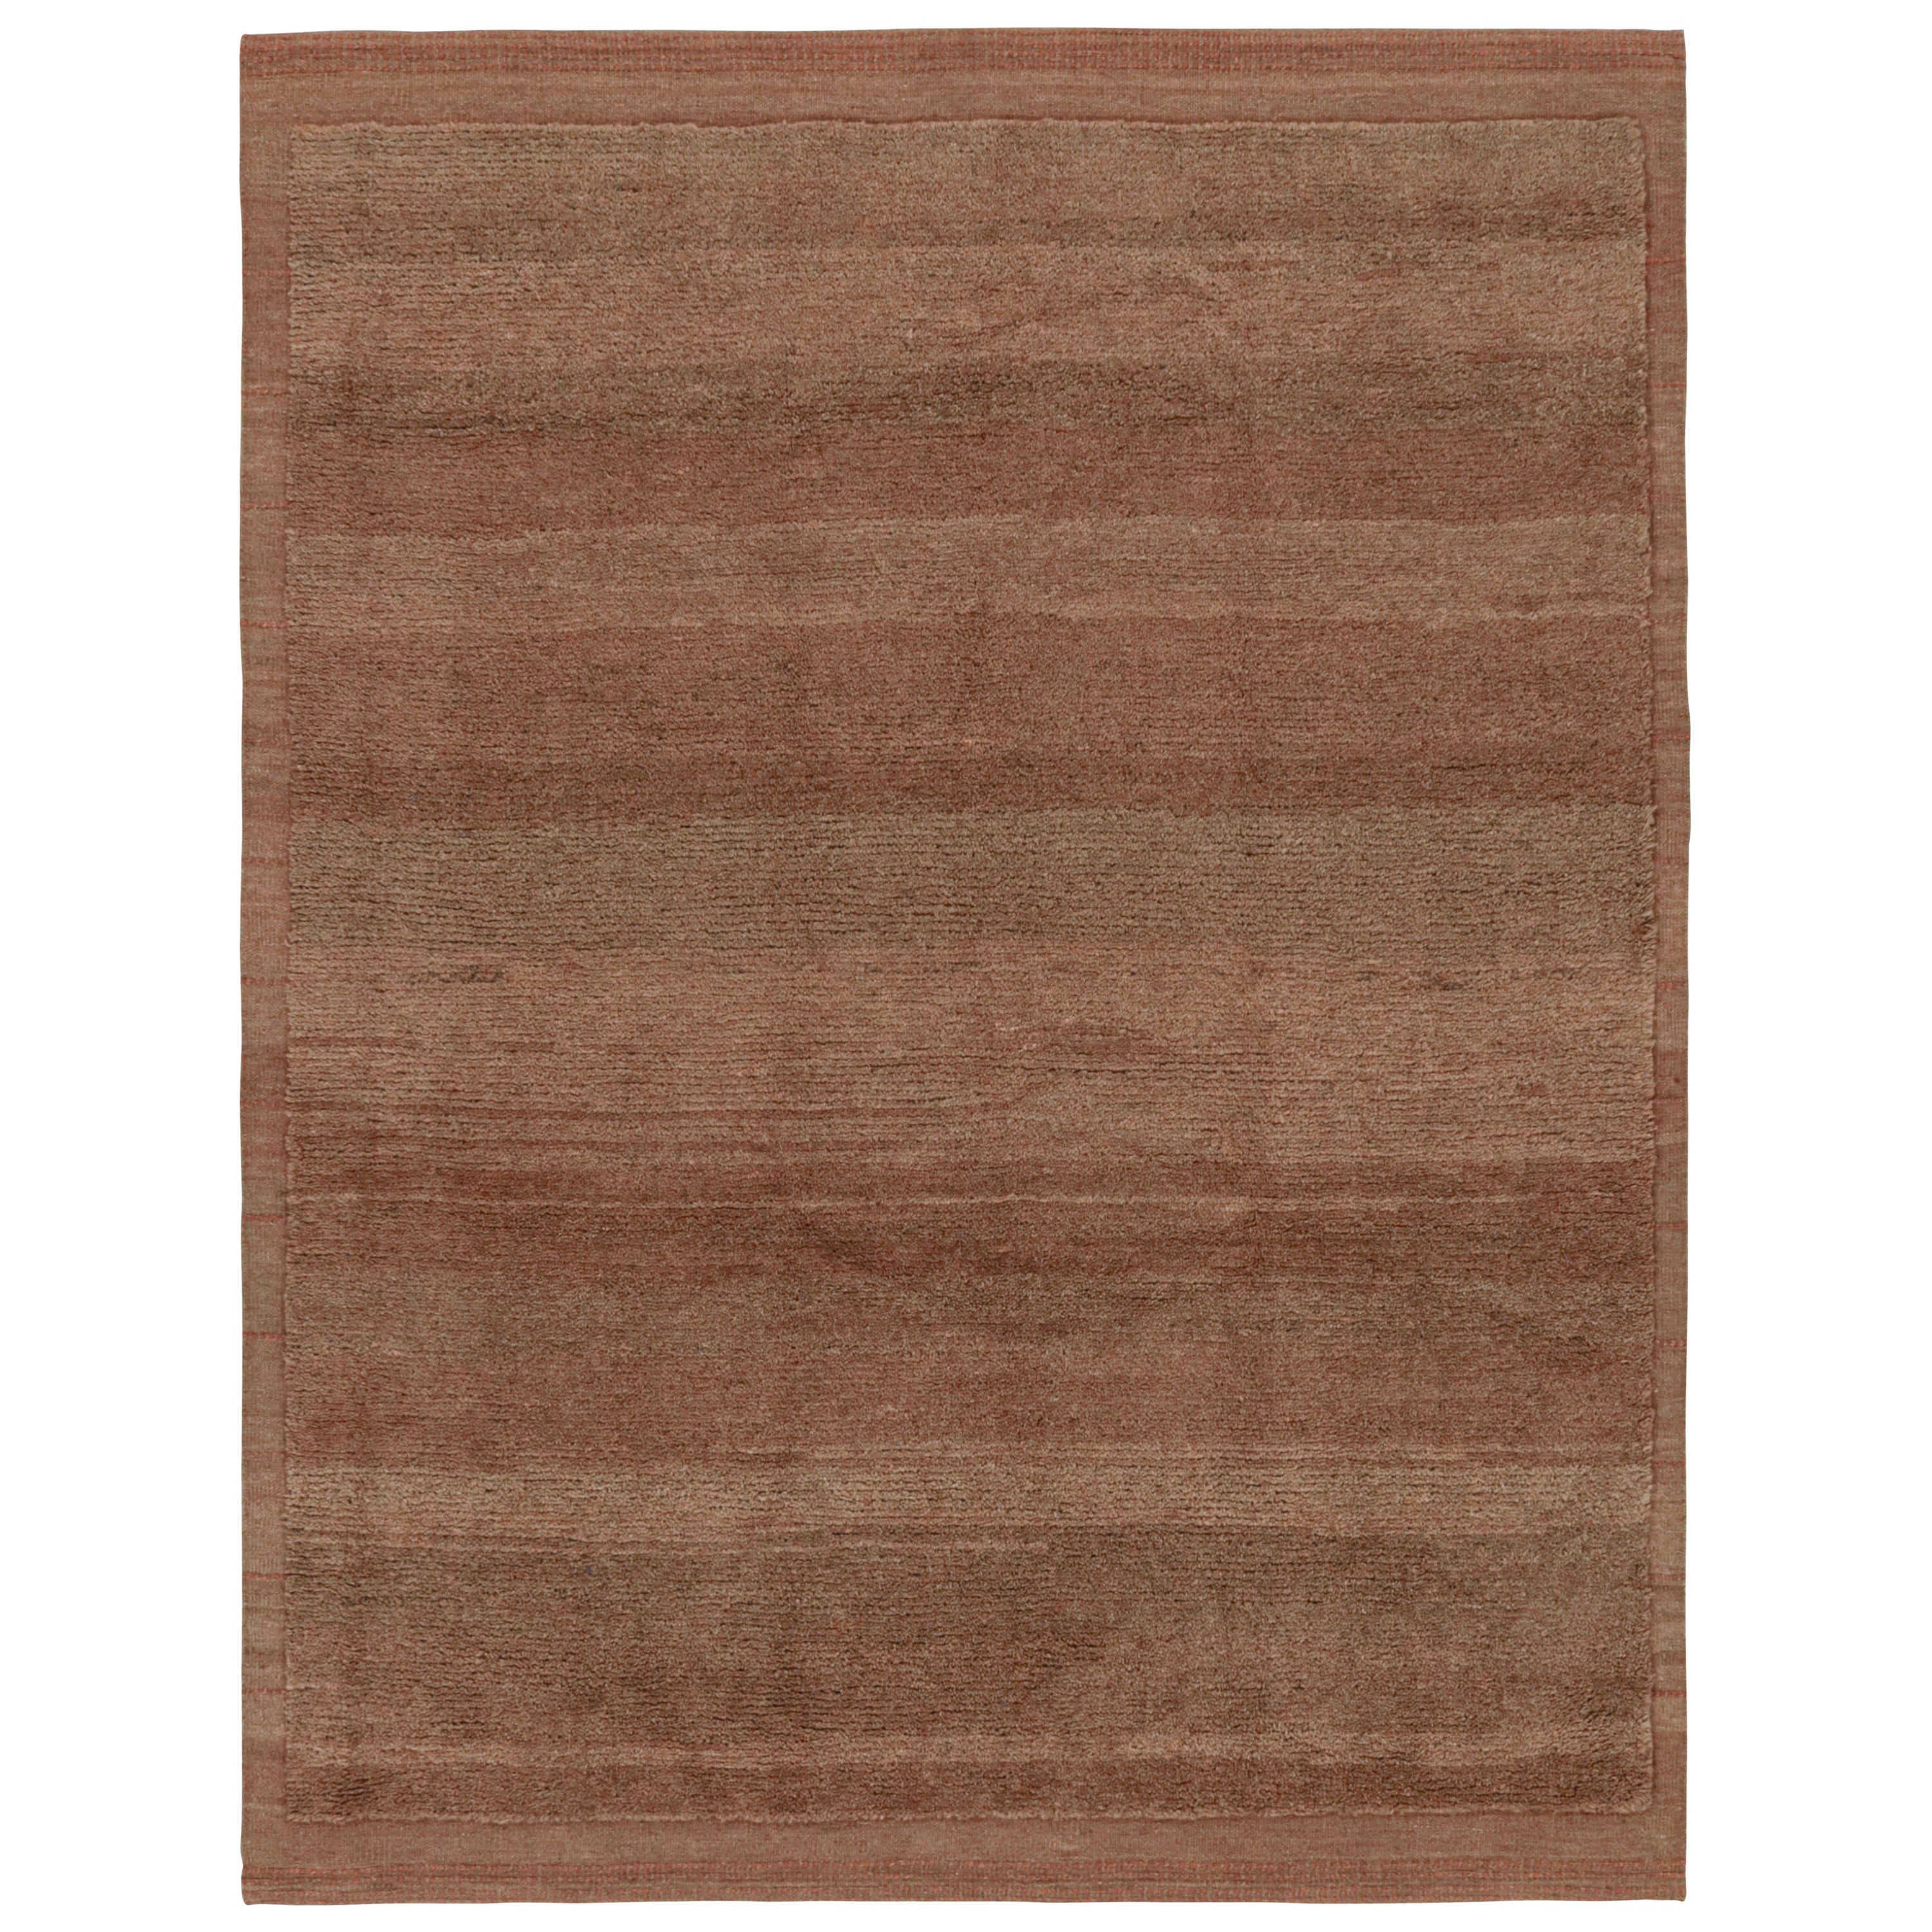 Rug & Kilim’s Modern Rug in Terracotta Tones and Striae with Brown Accents